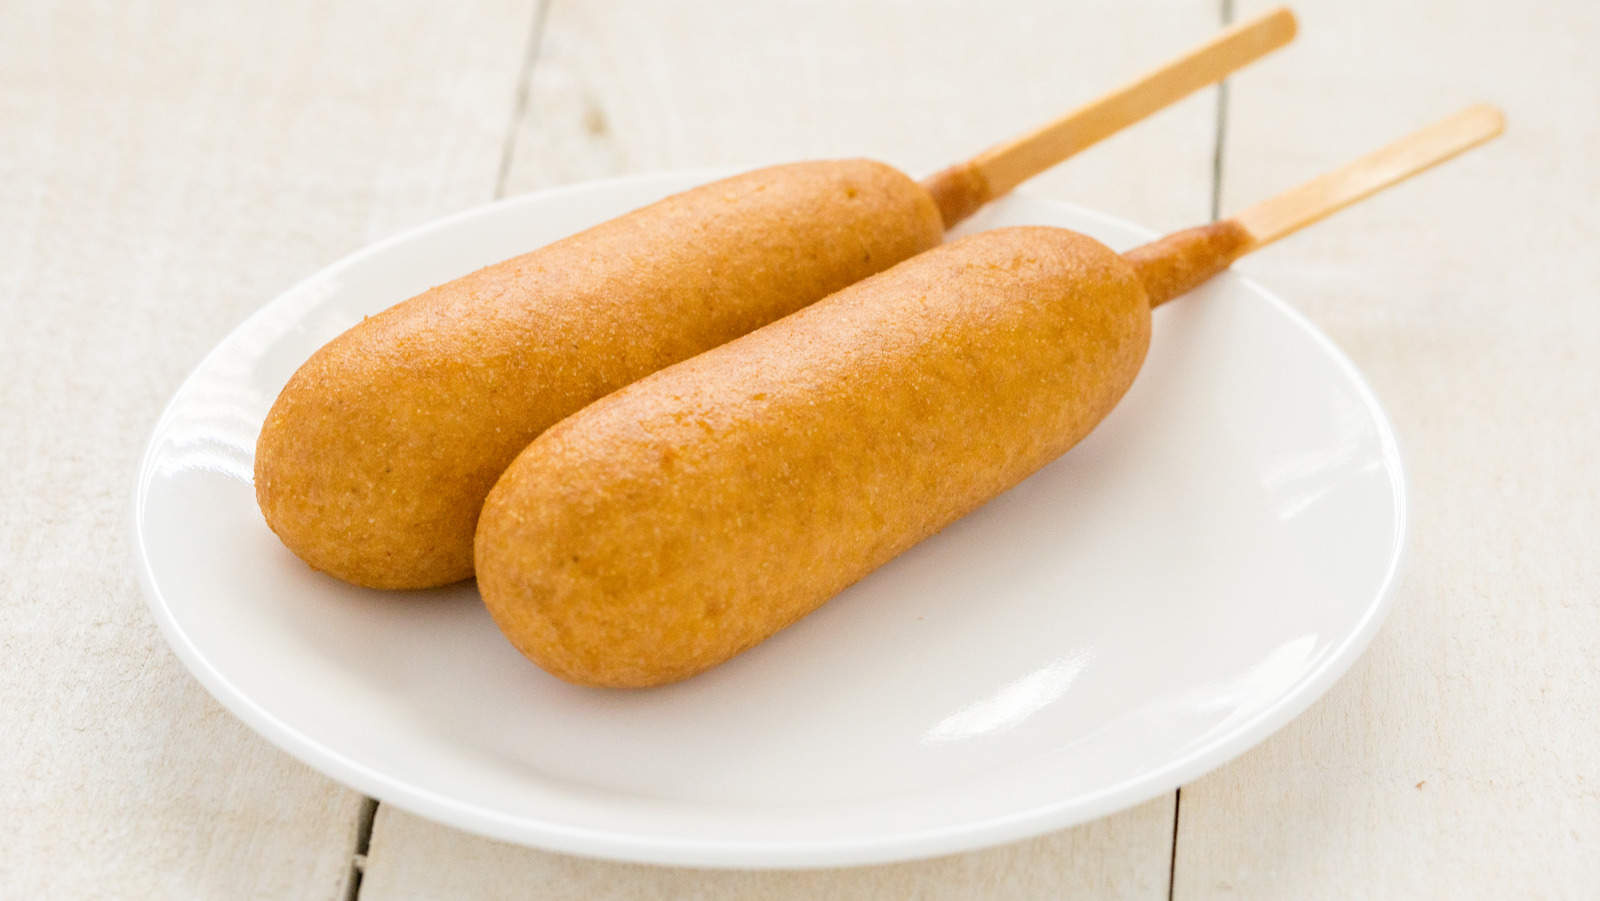 Cut Your Corn Dog Down The Middle For A Delicious Chili Dog Bun